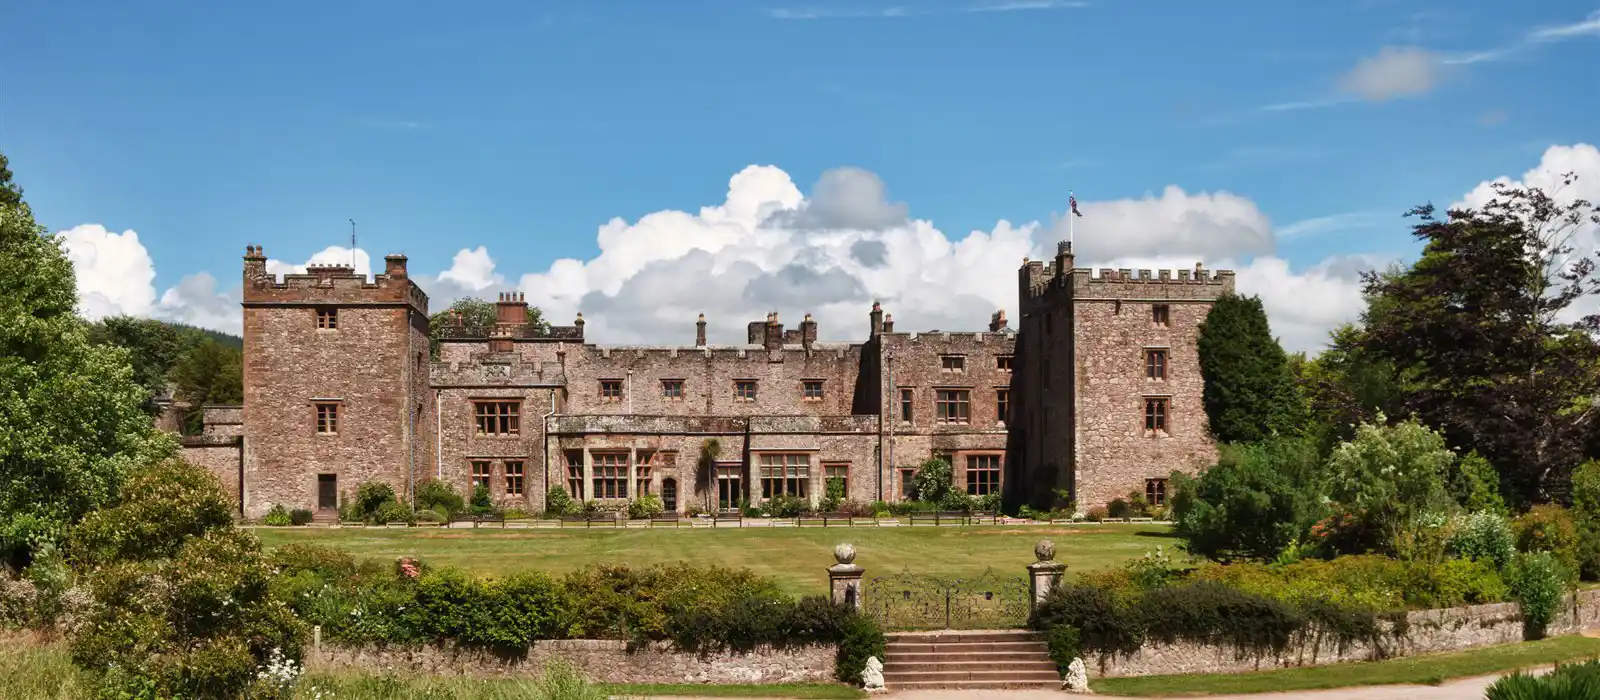 Muncaster Castle is a great day out for families in the Lake District